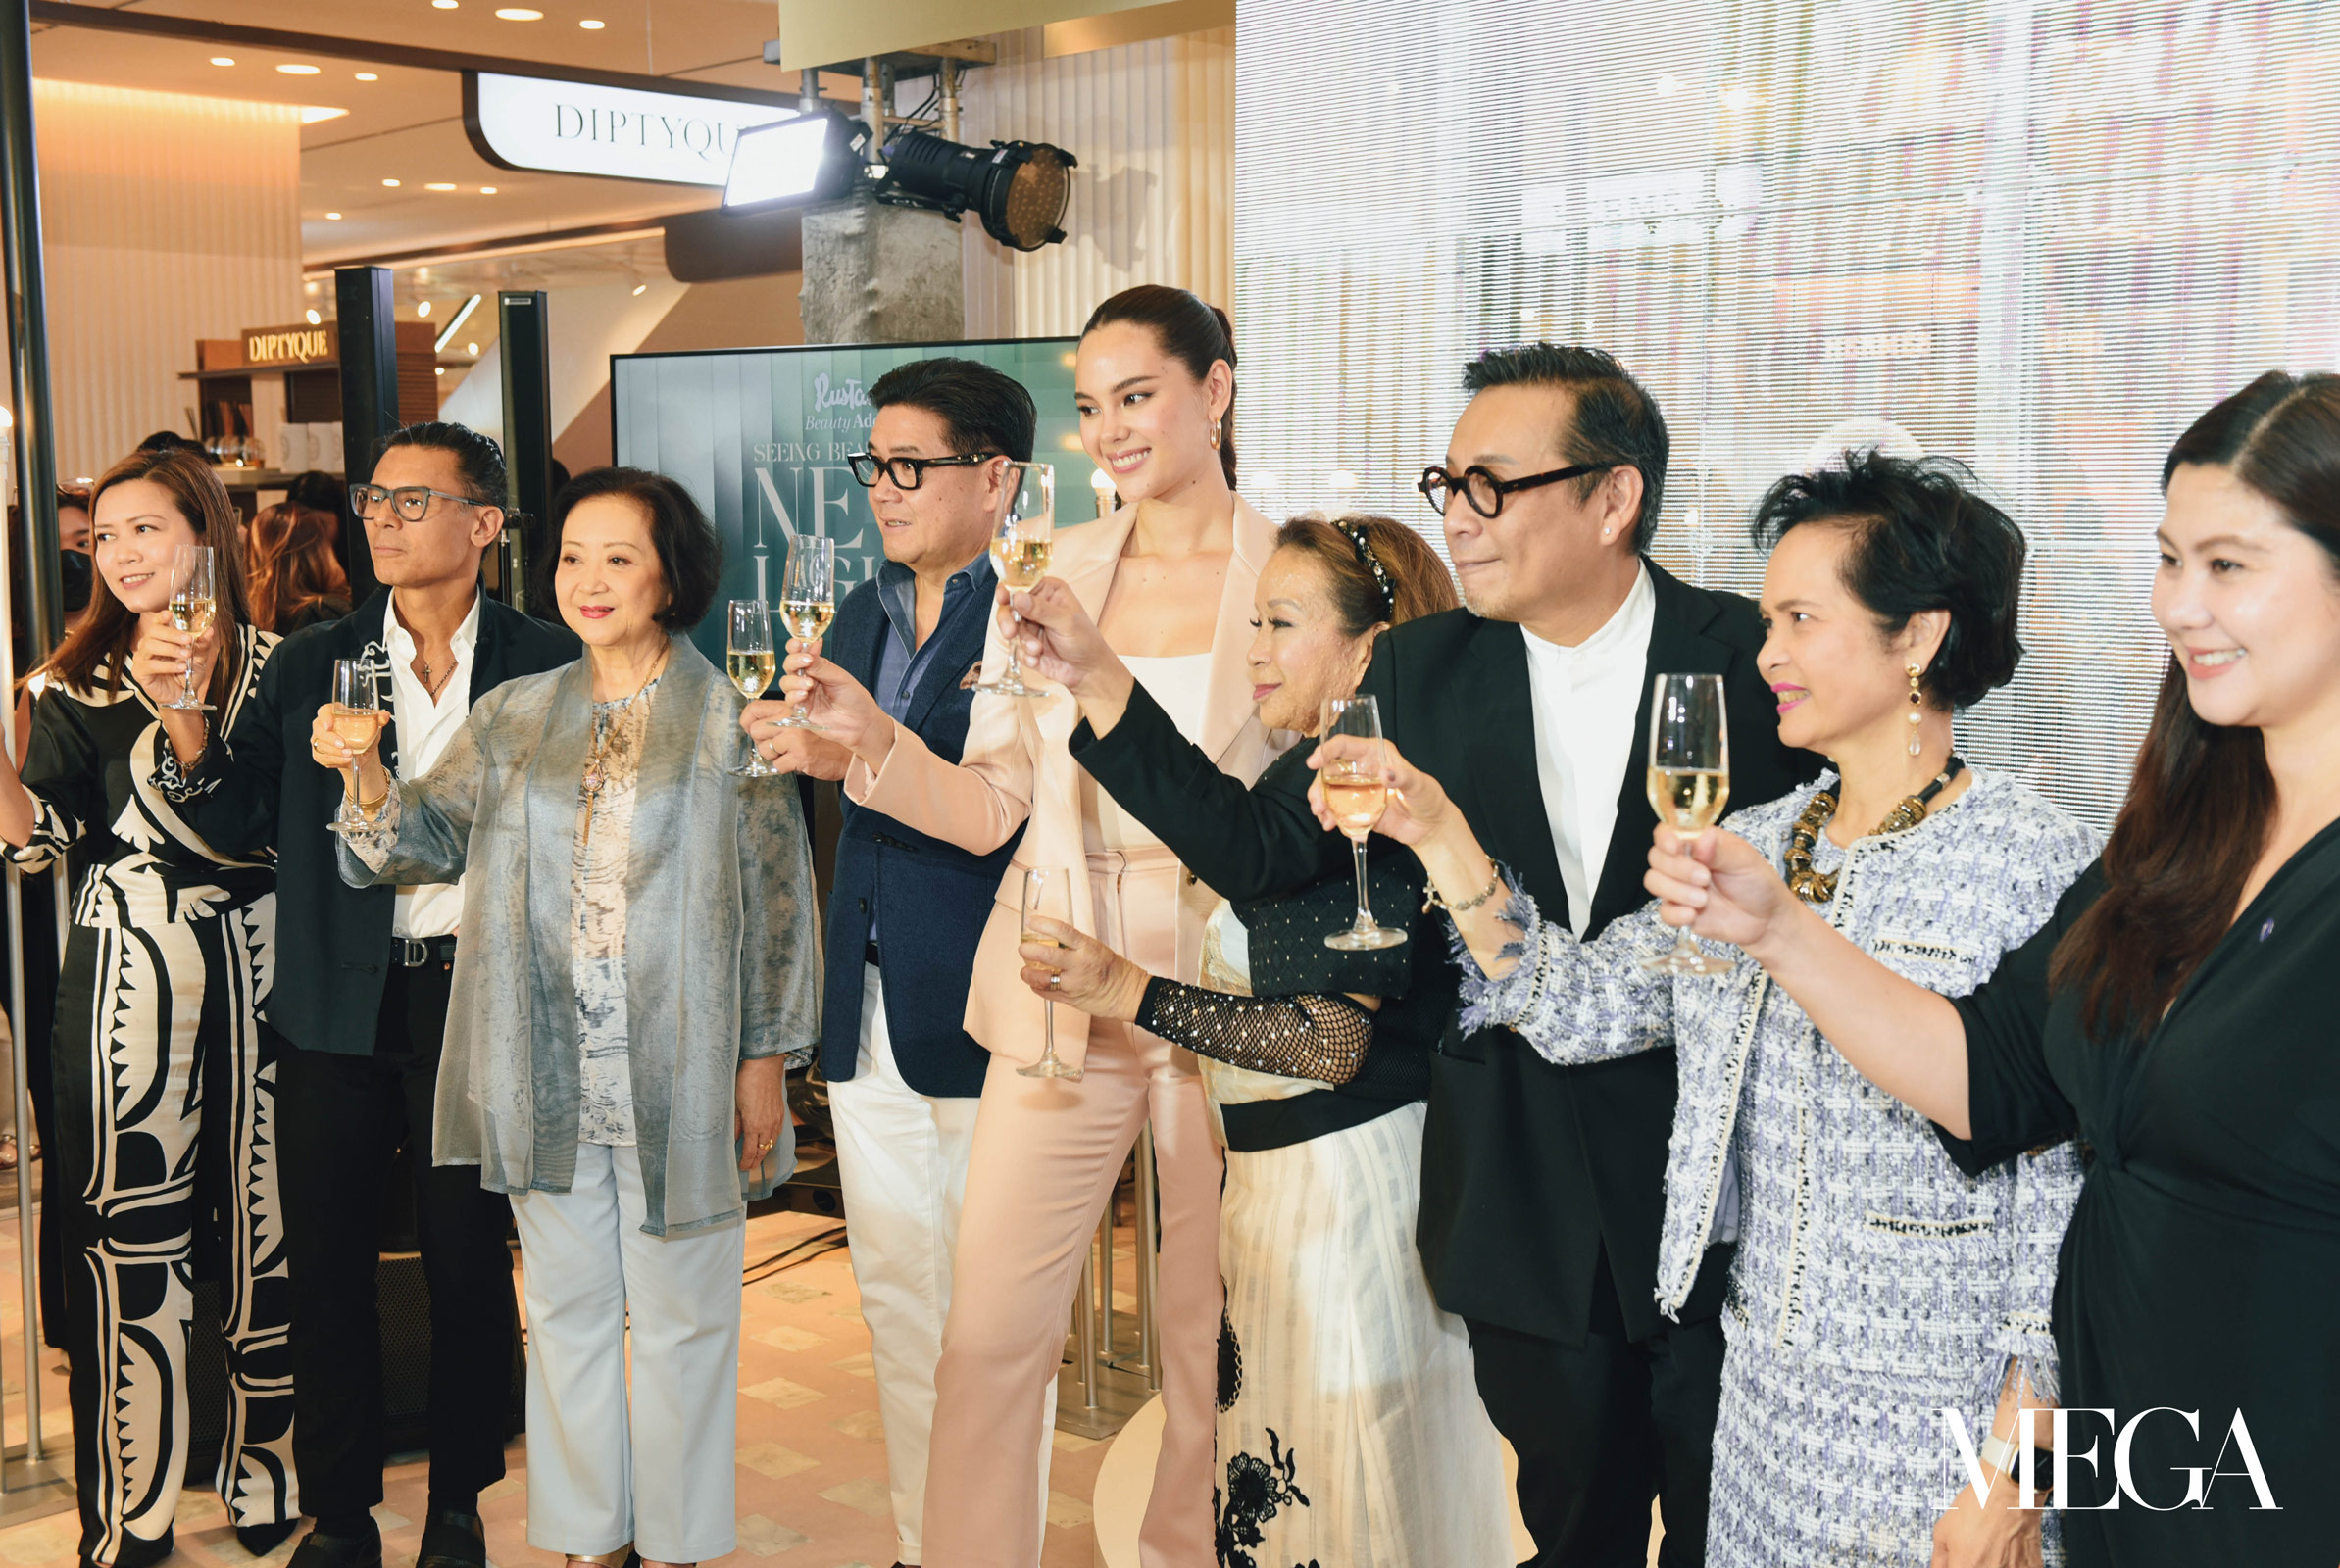 Rustan's executives and Catriona Gray during the Beauty Addict Event